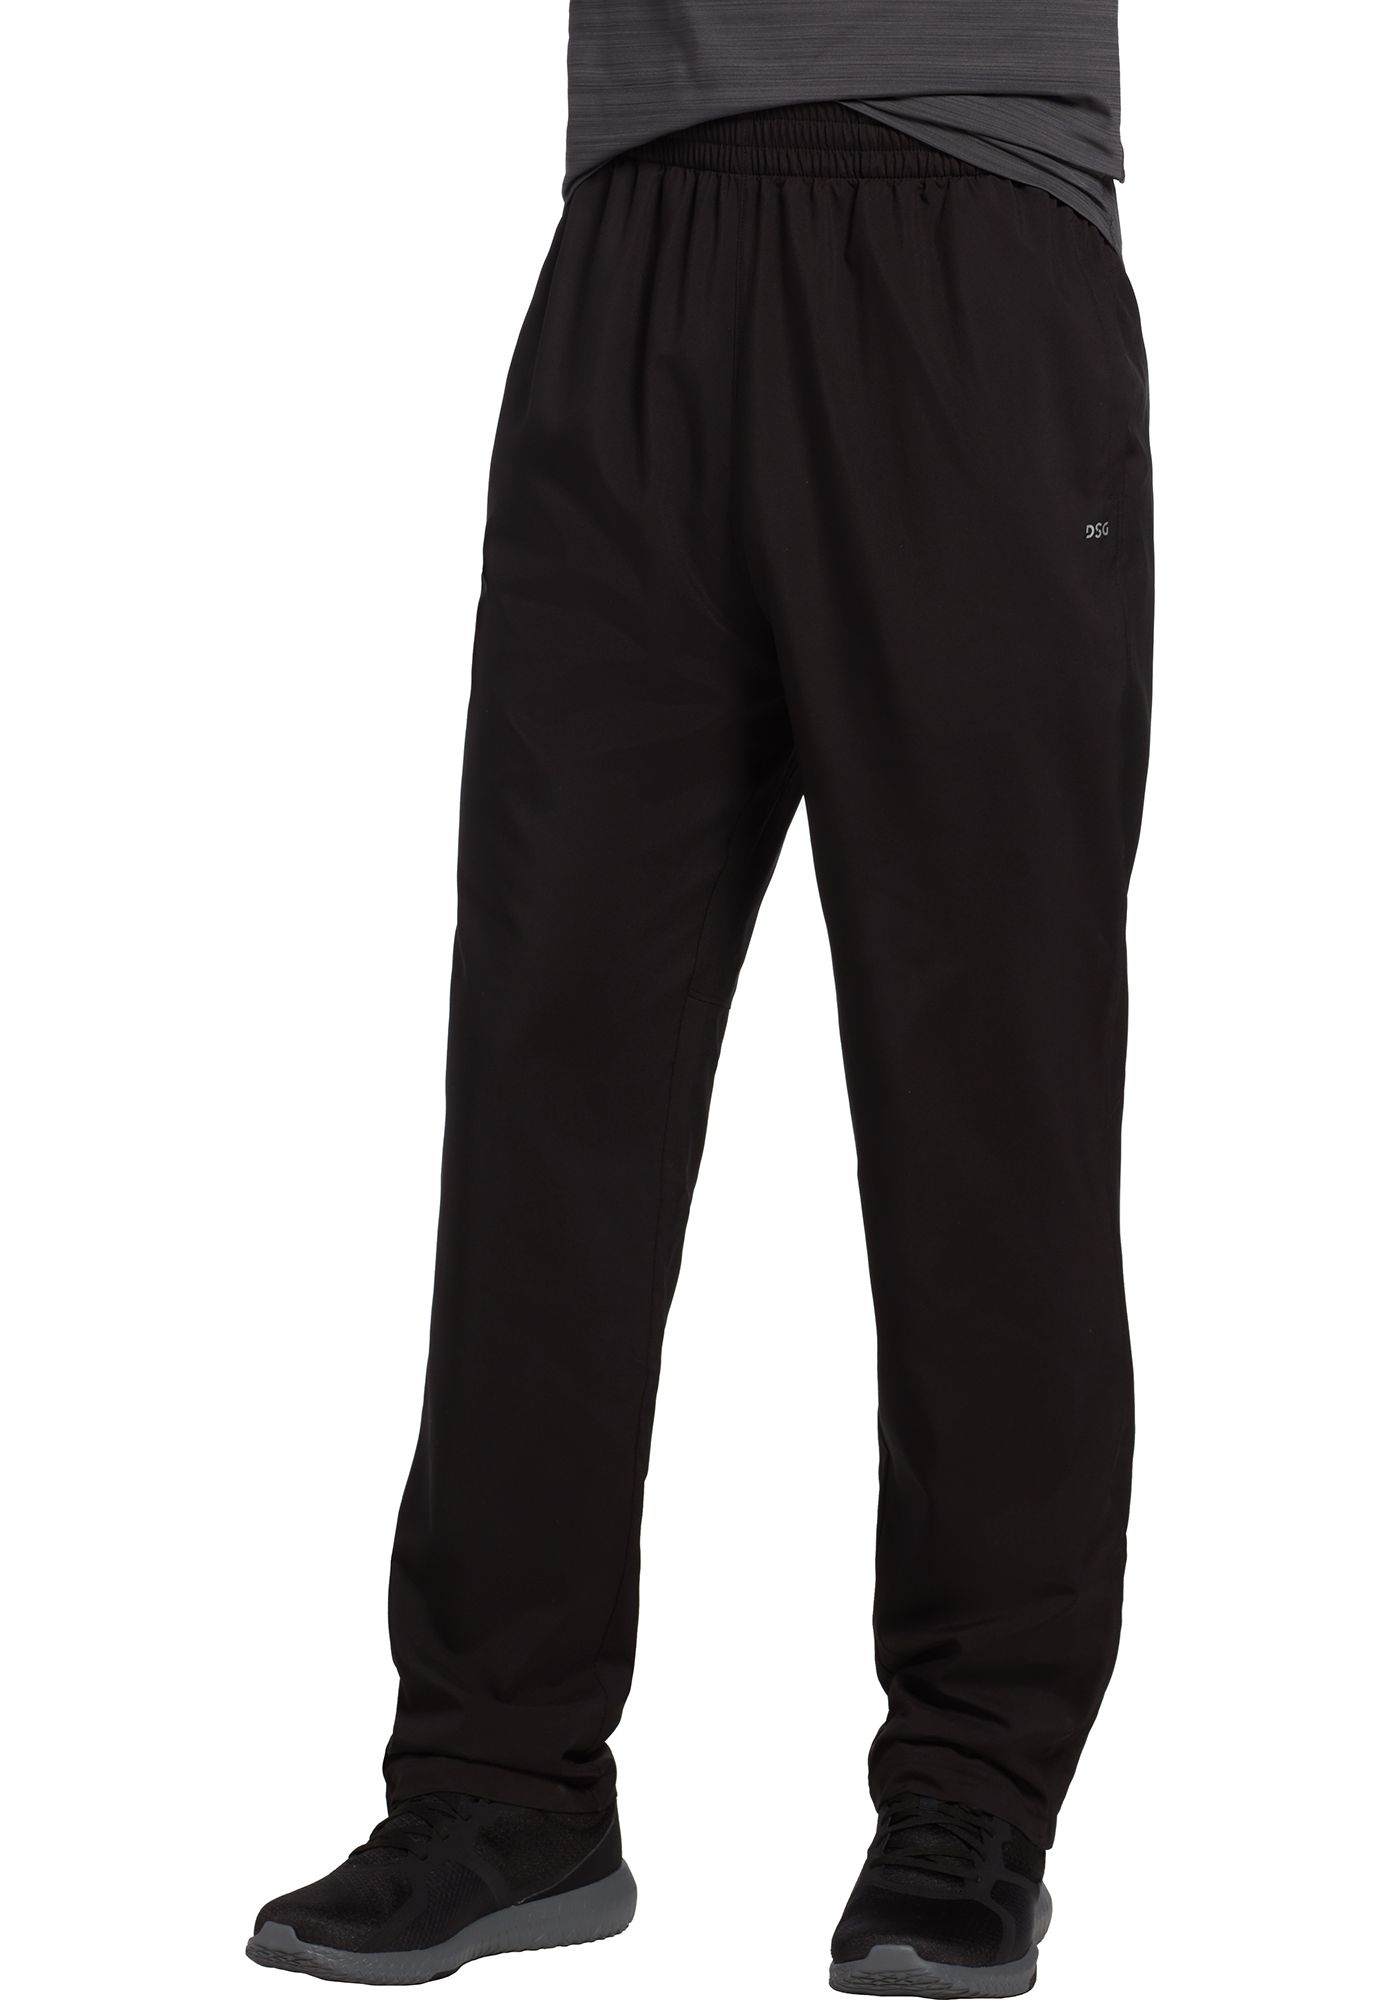  Dsg Workout Pants for Gym